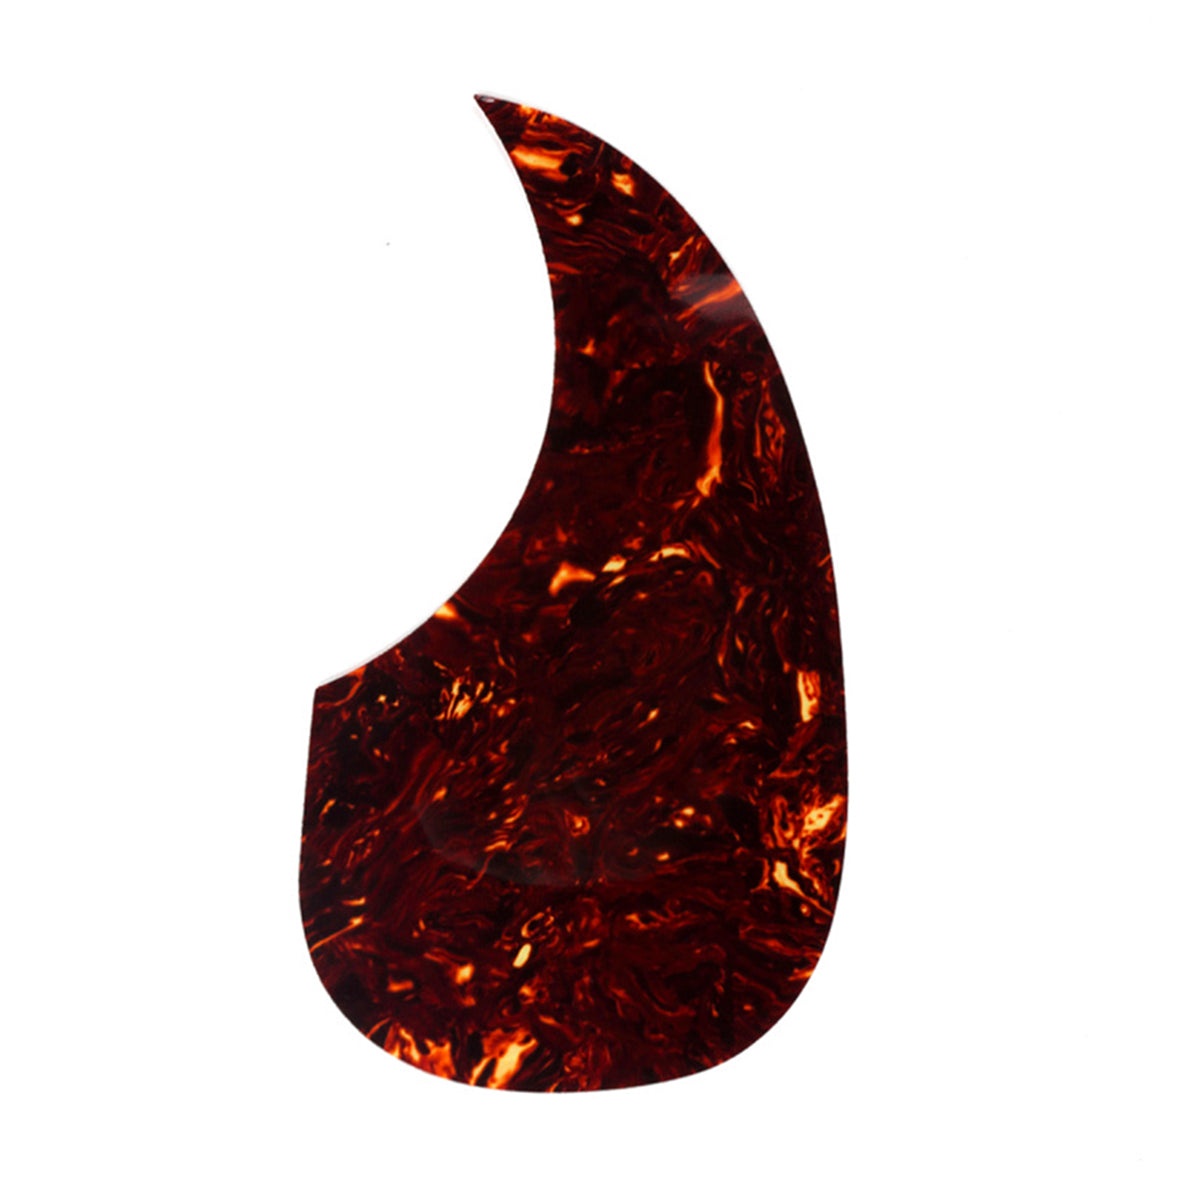 Musiclily Oversize Teardrop Acoustic Guitar Self-adhesive Pickguard for Martin D28 Style guitar,Tortoise Shell